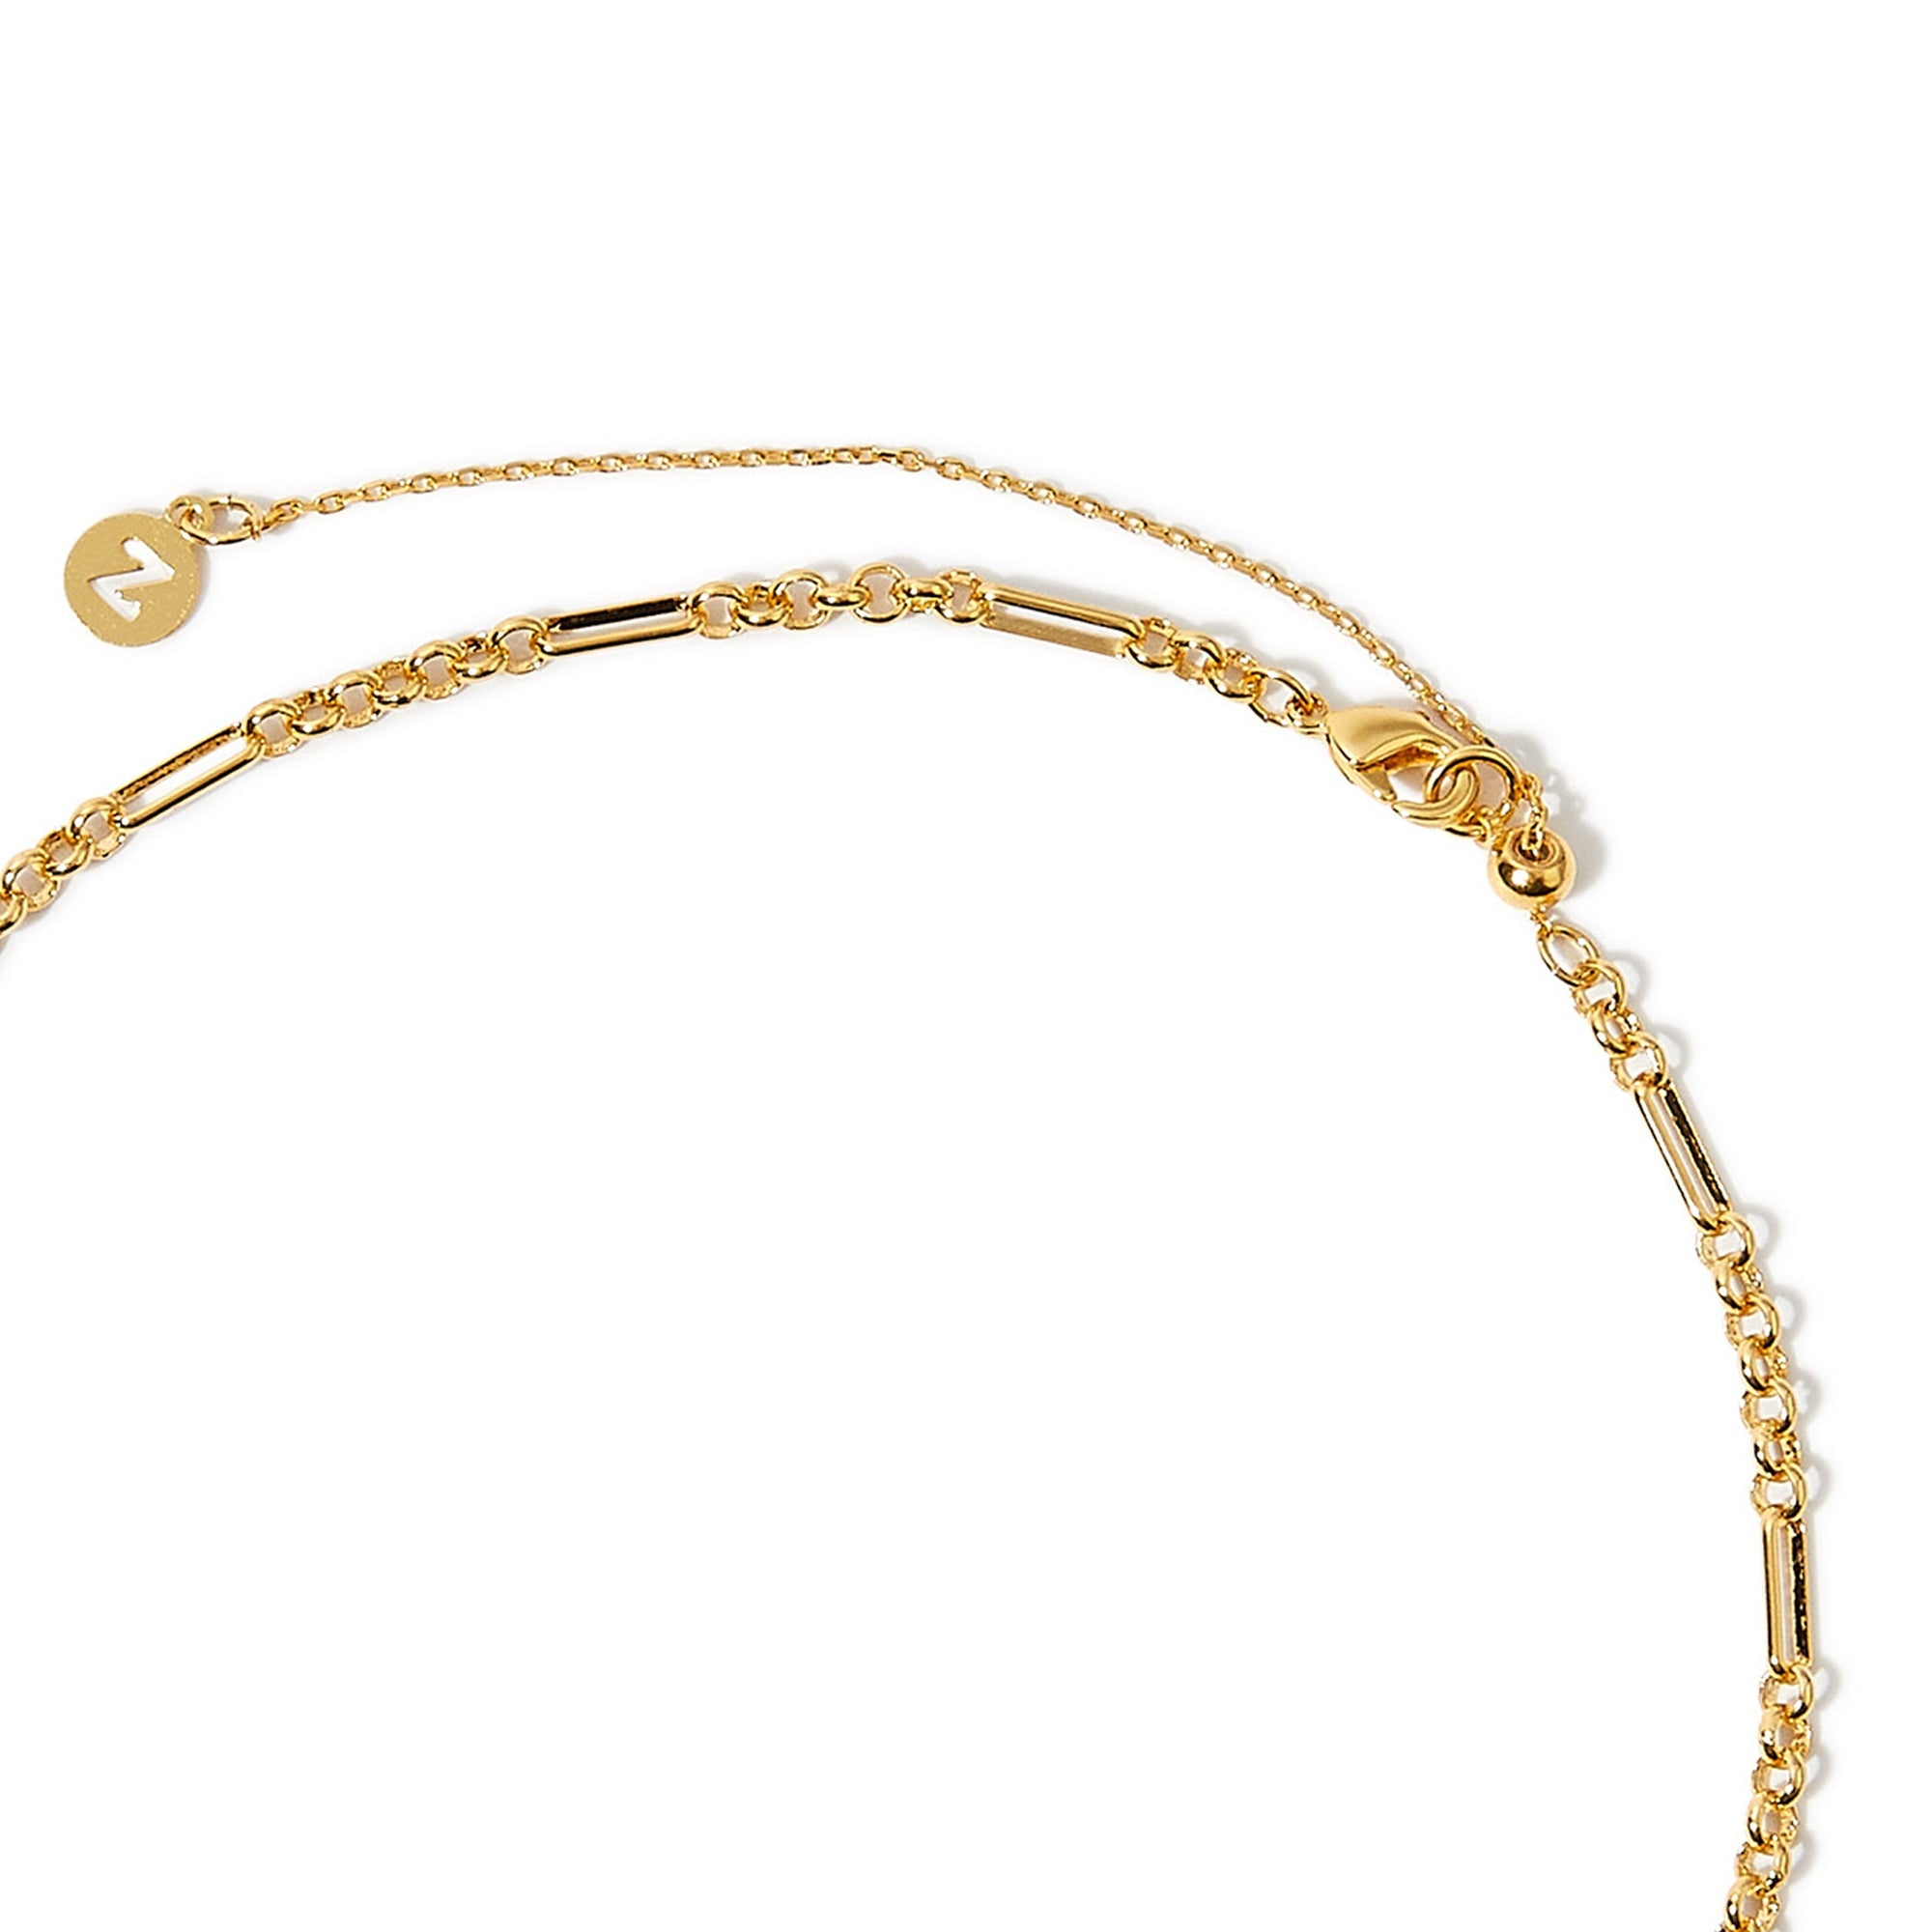 Real Gold Plated Z Figaro Chain Choker Necklace For Women By Accessorize London